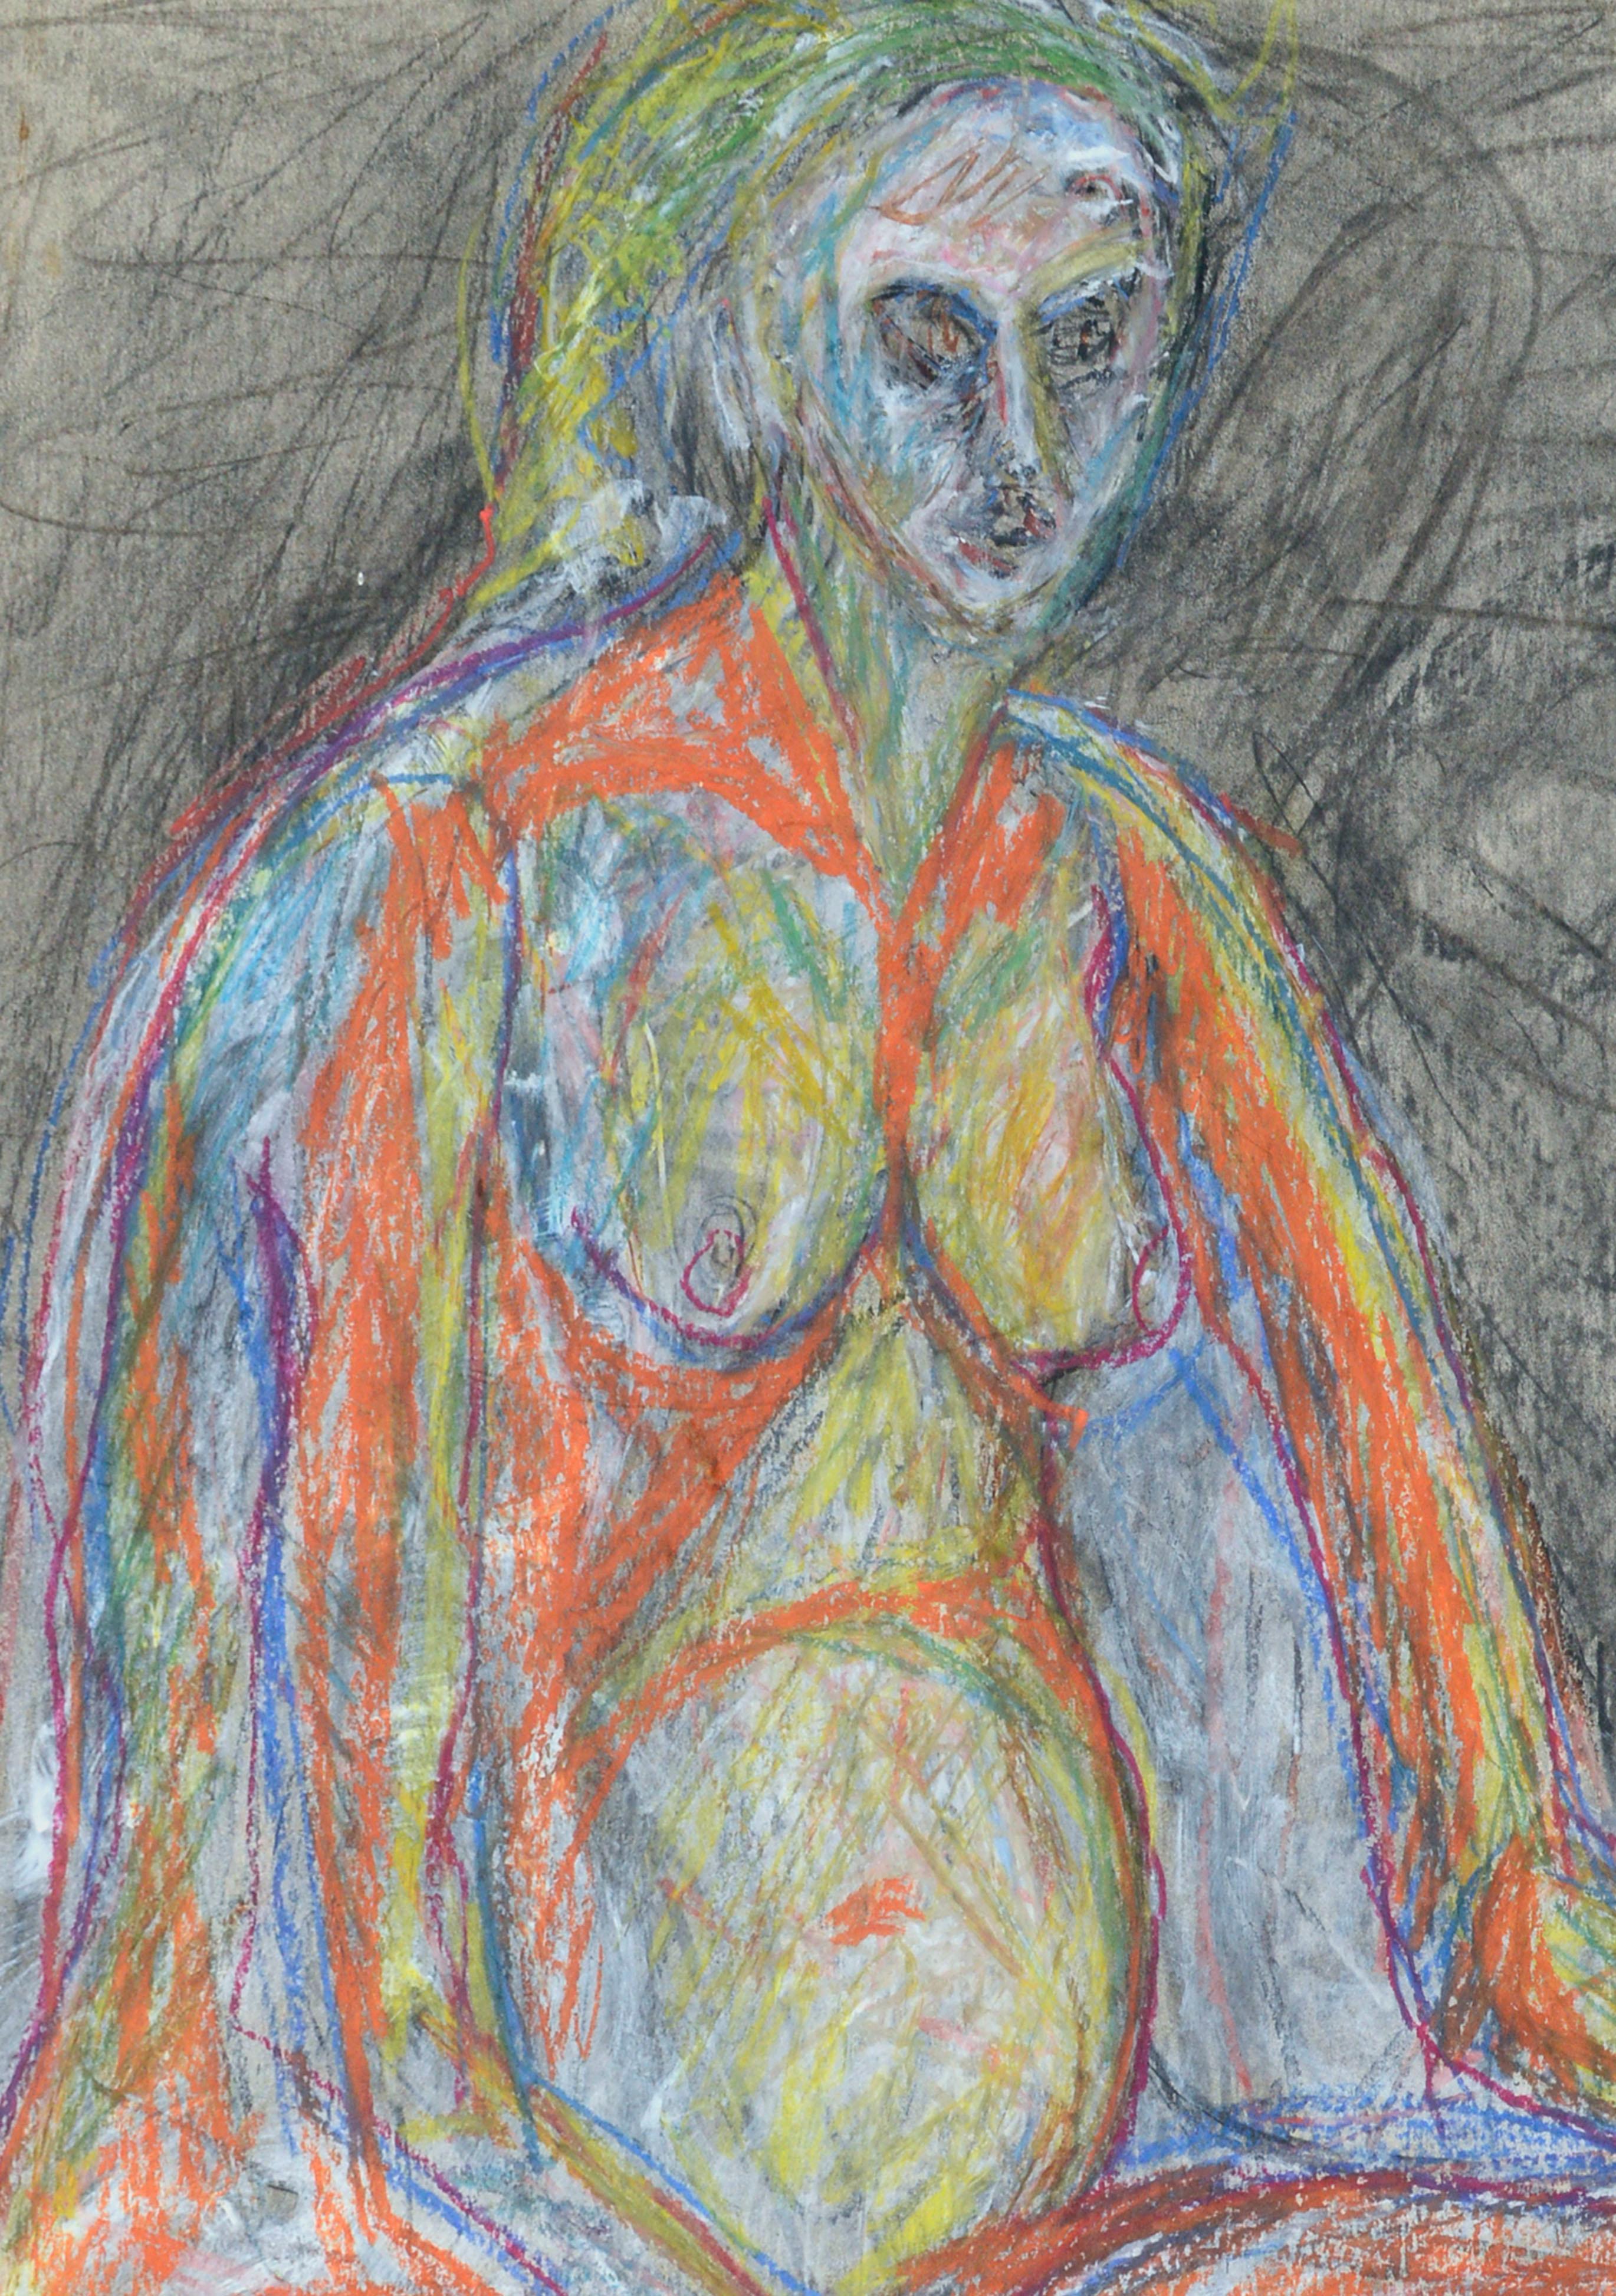 Vintage Fauvist Nude Study - Gray Figurative Painting by Louis Nadalini